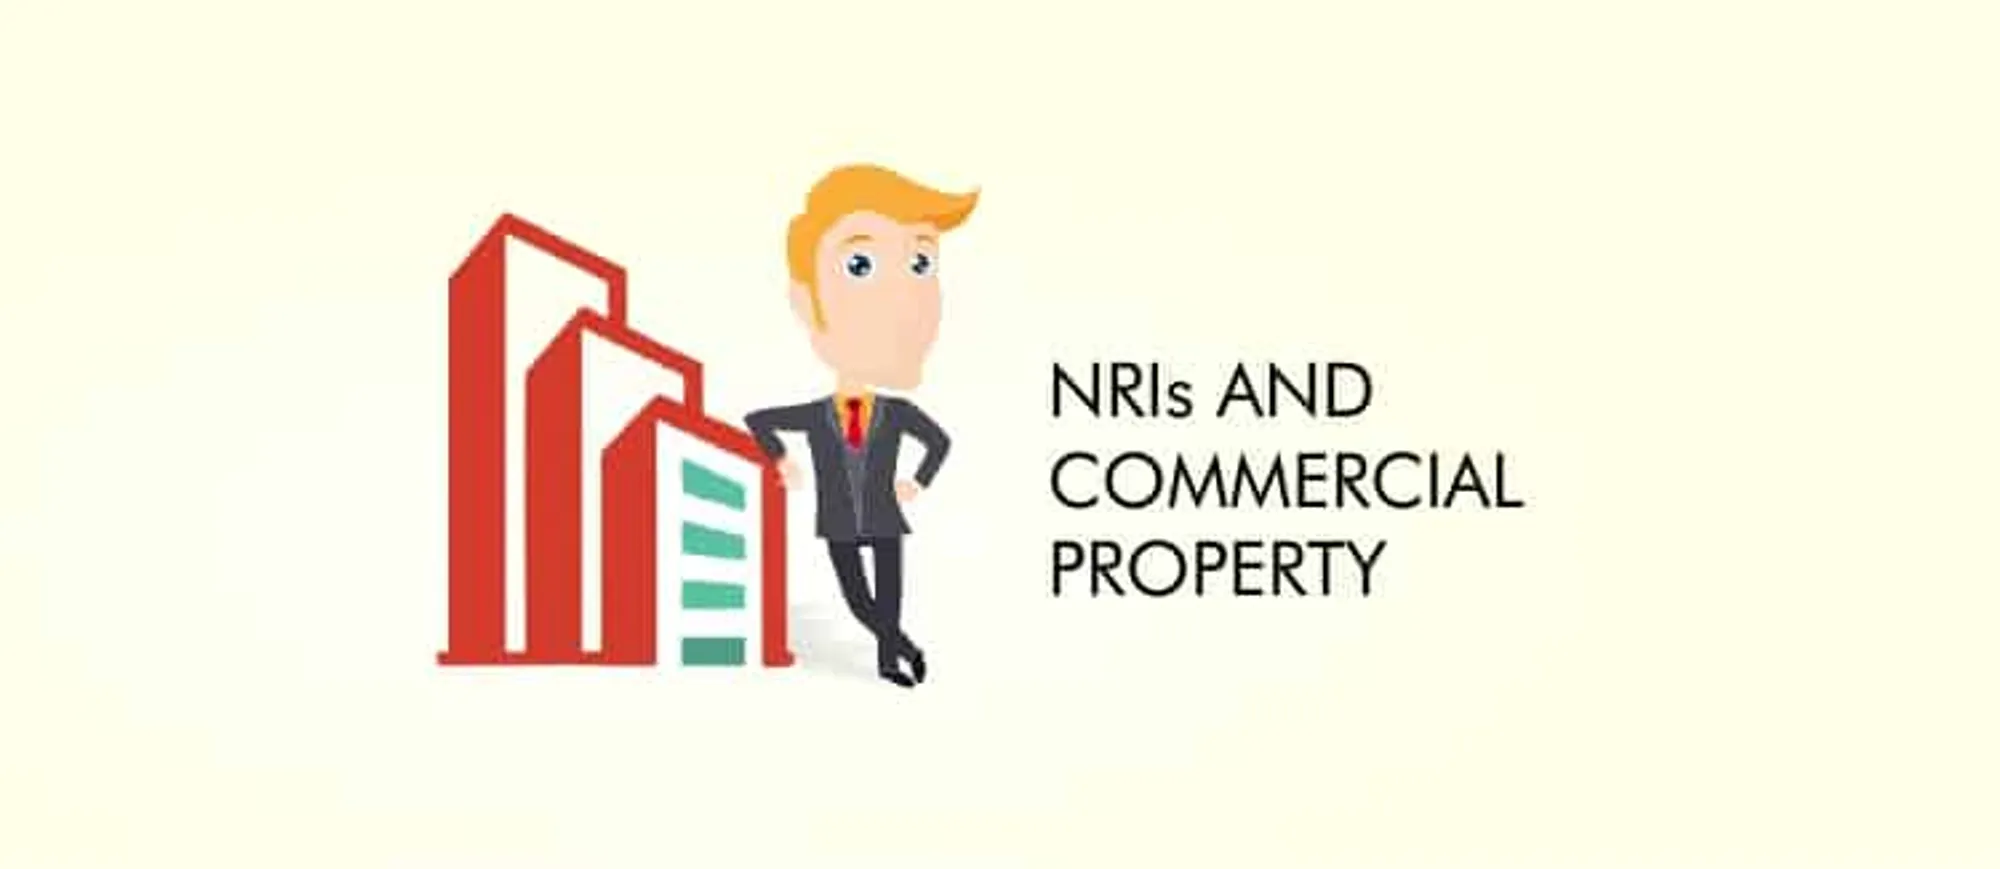 NRIs AND COMMERCIAL PROPERTY